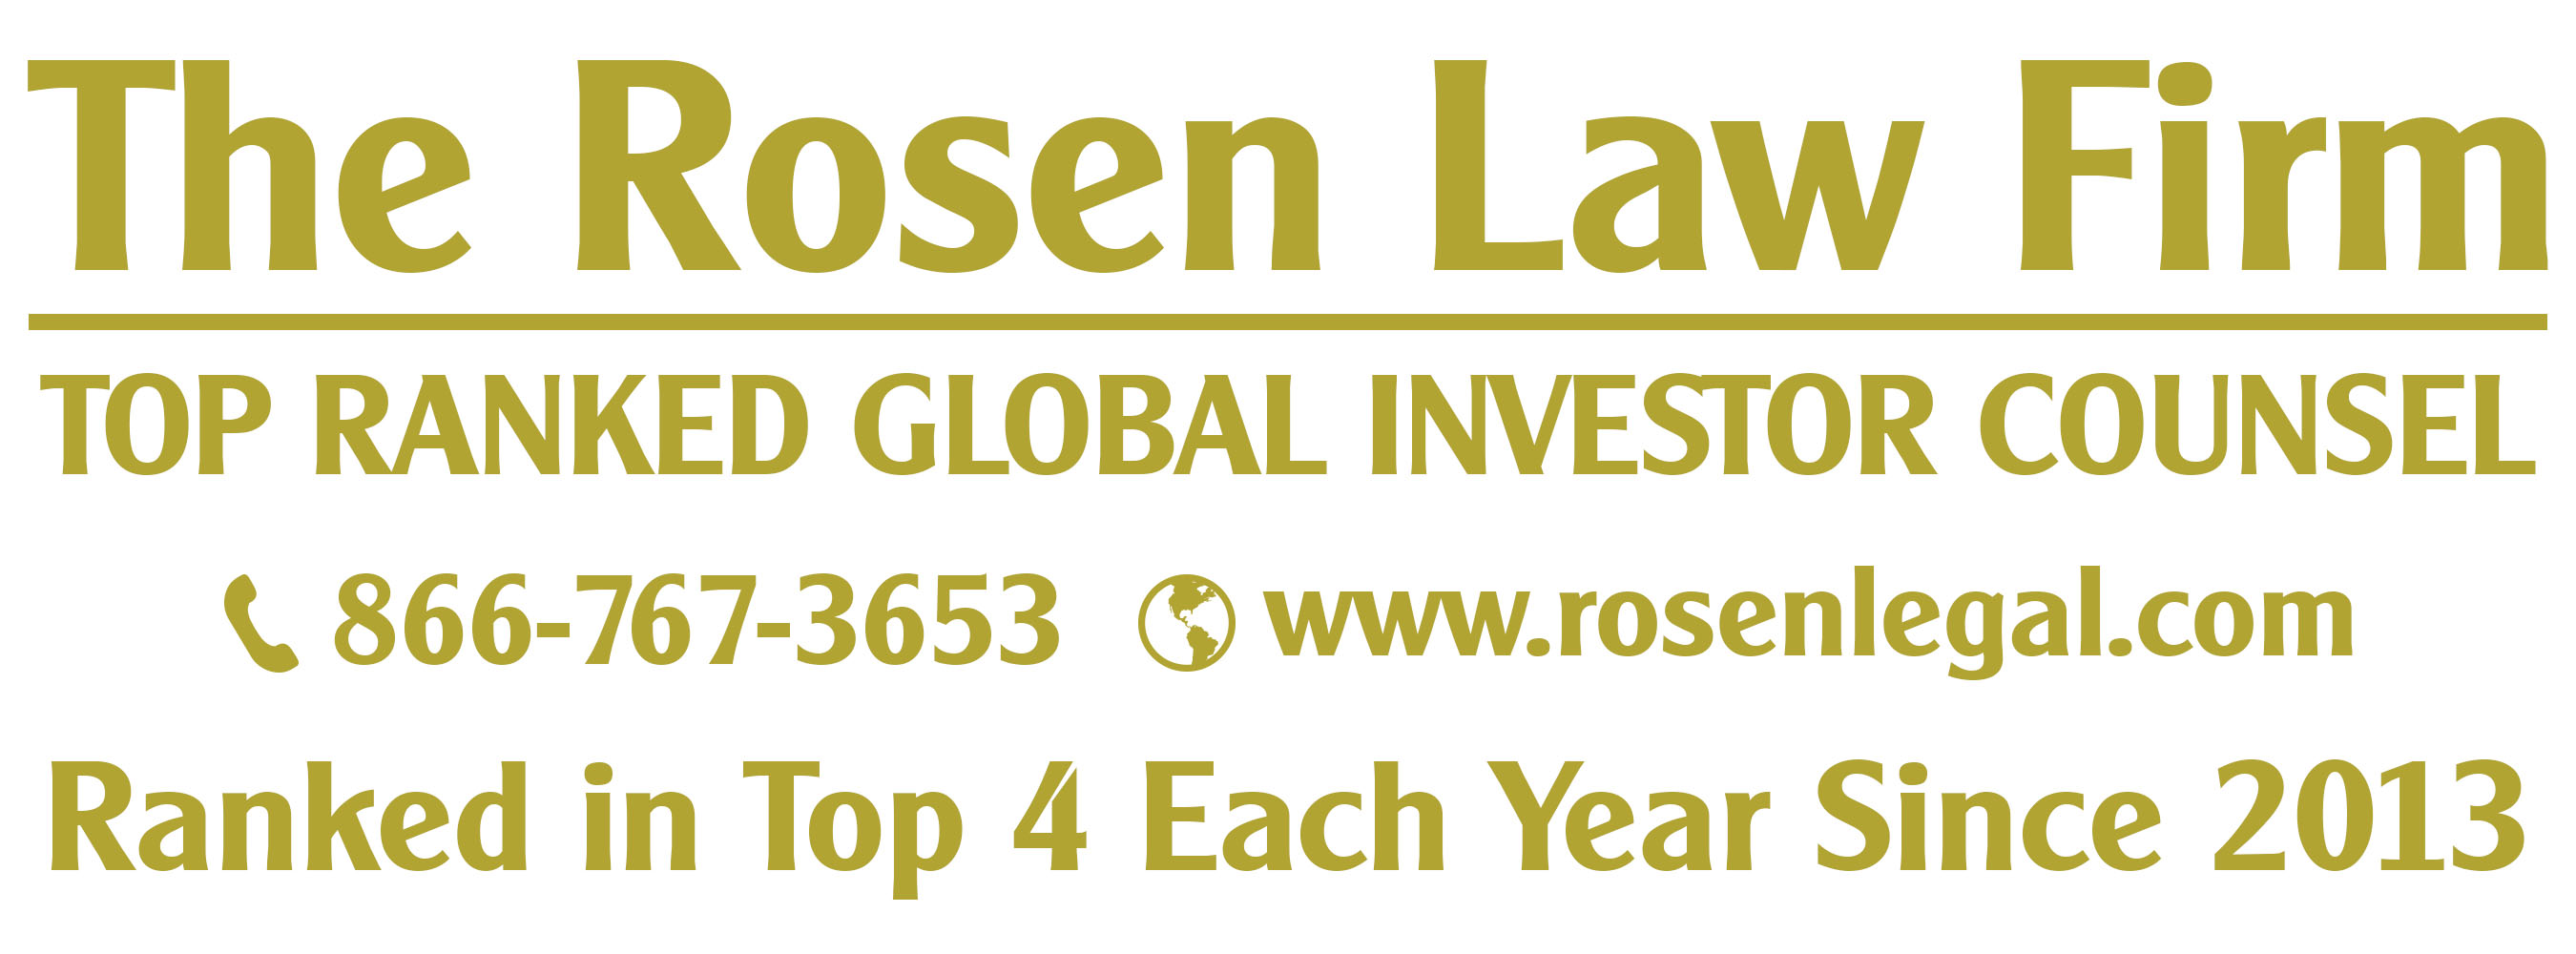 Rosen Law Firm PA, Monday, November 28, 2022, Press release picture